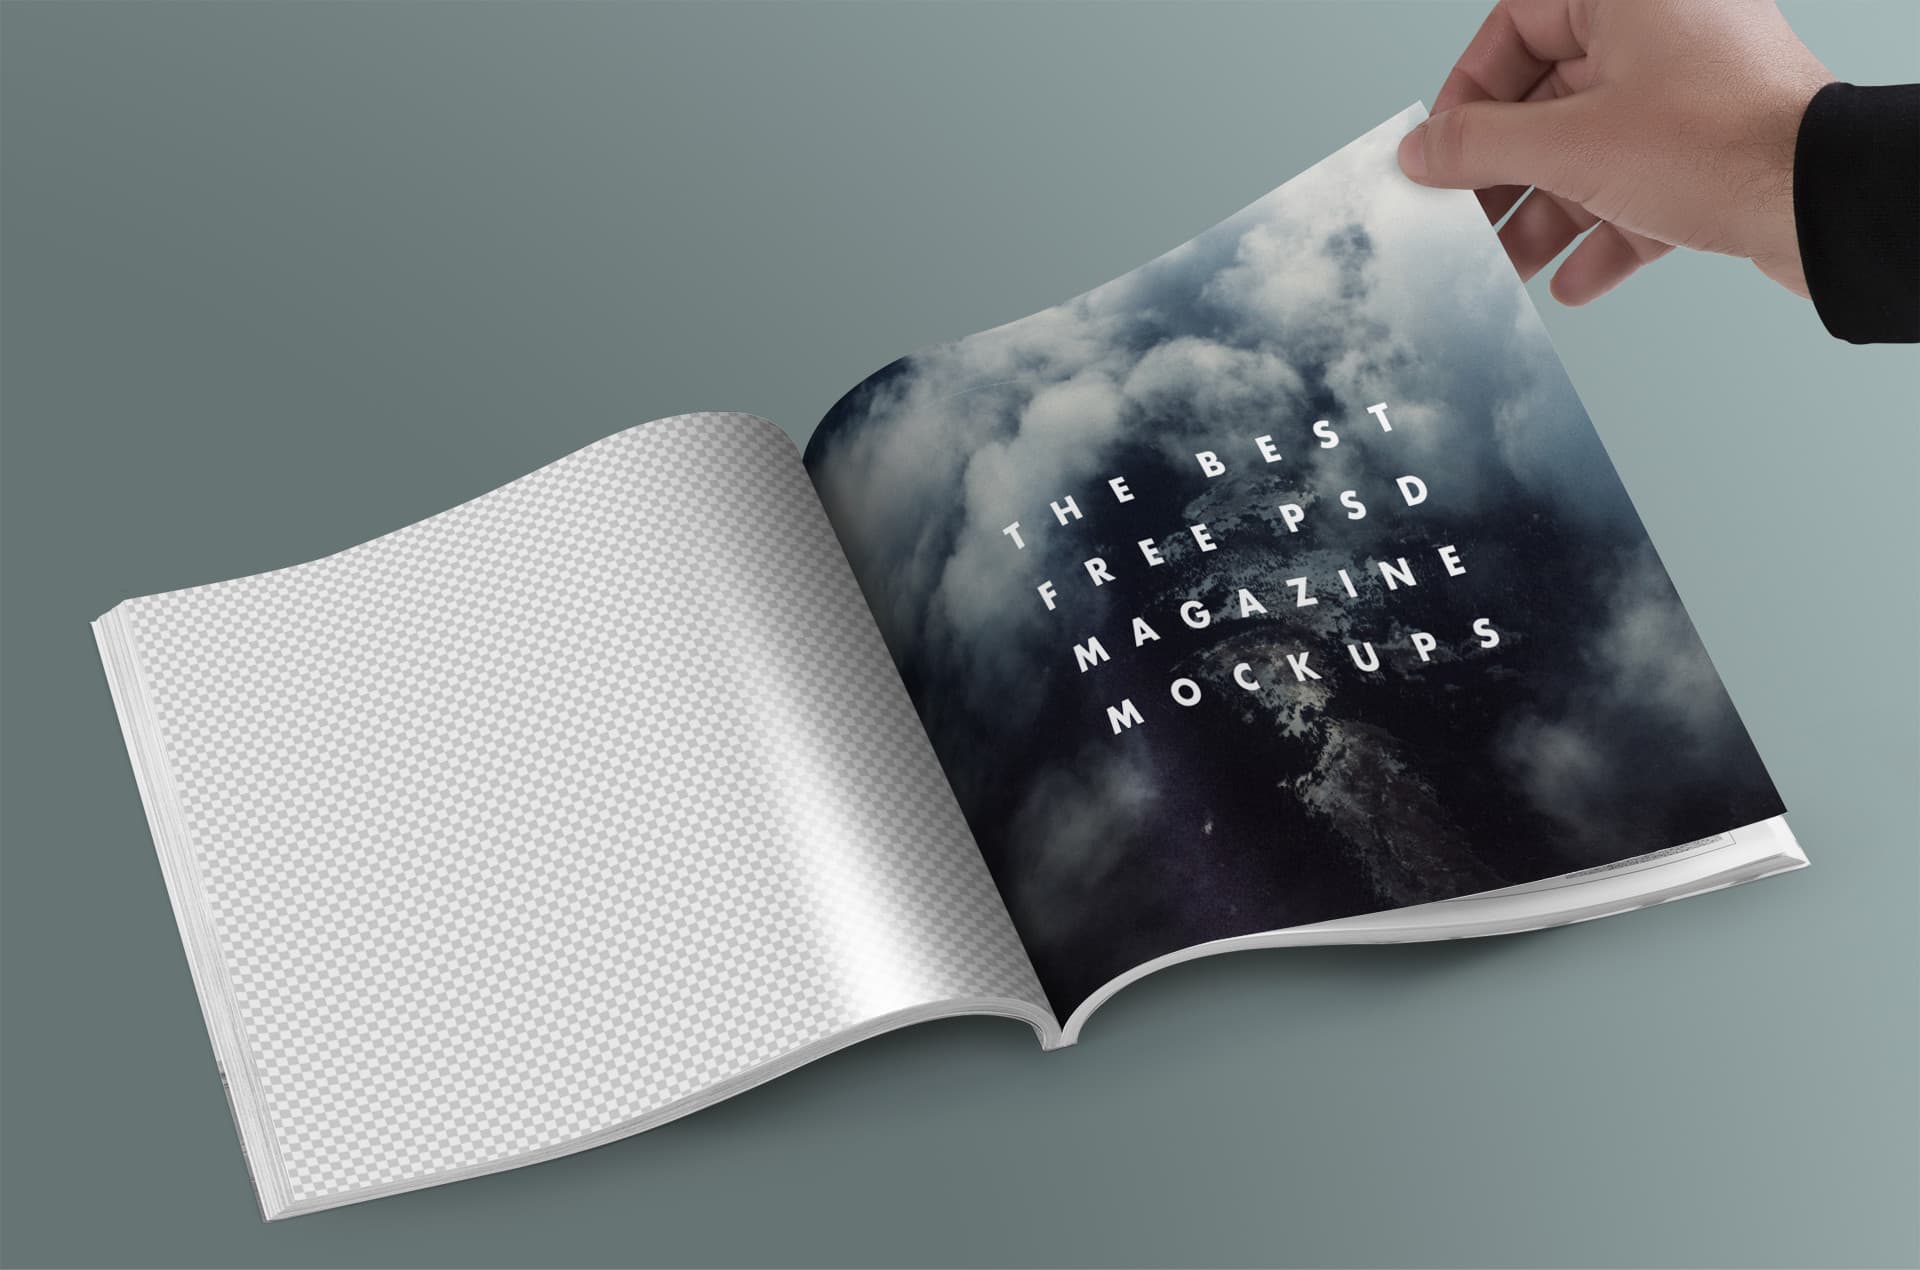 Download The Best 15 Free Psd Magazine Mockups Hipsthetic PSD Mockup Templates